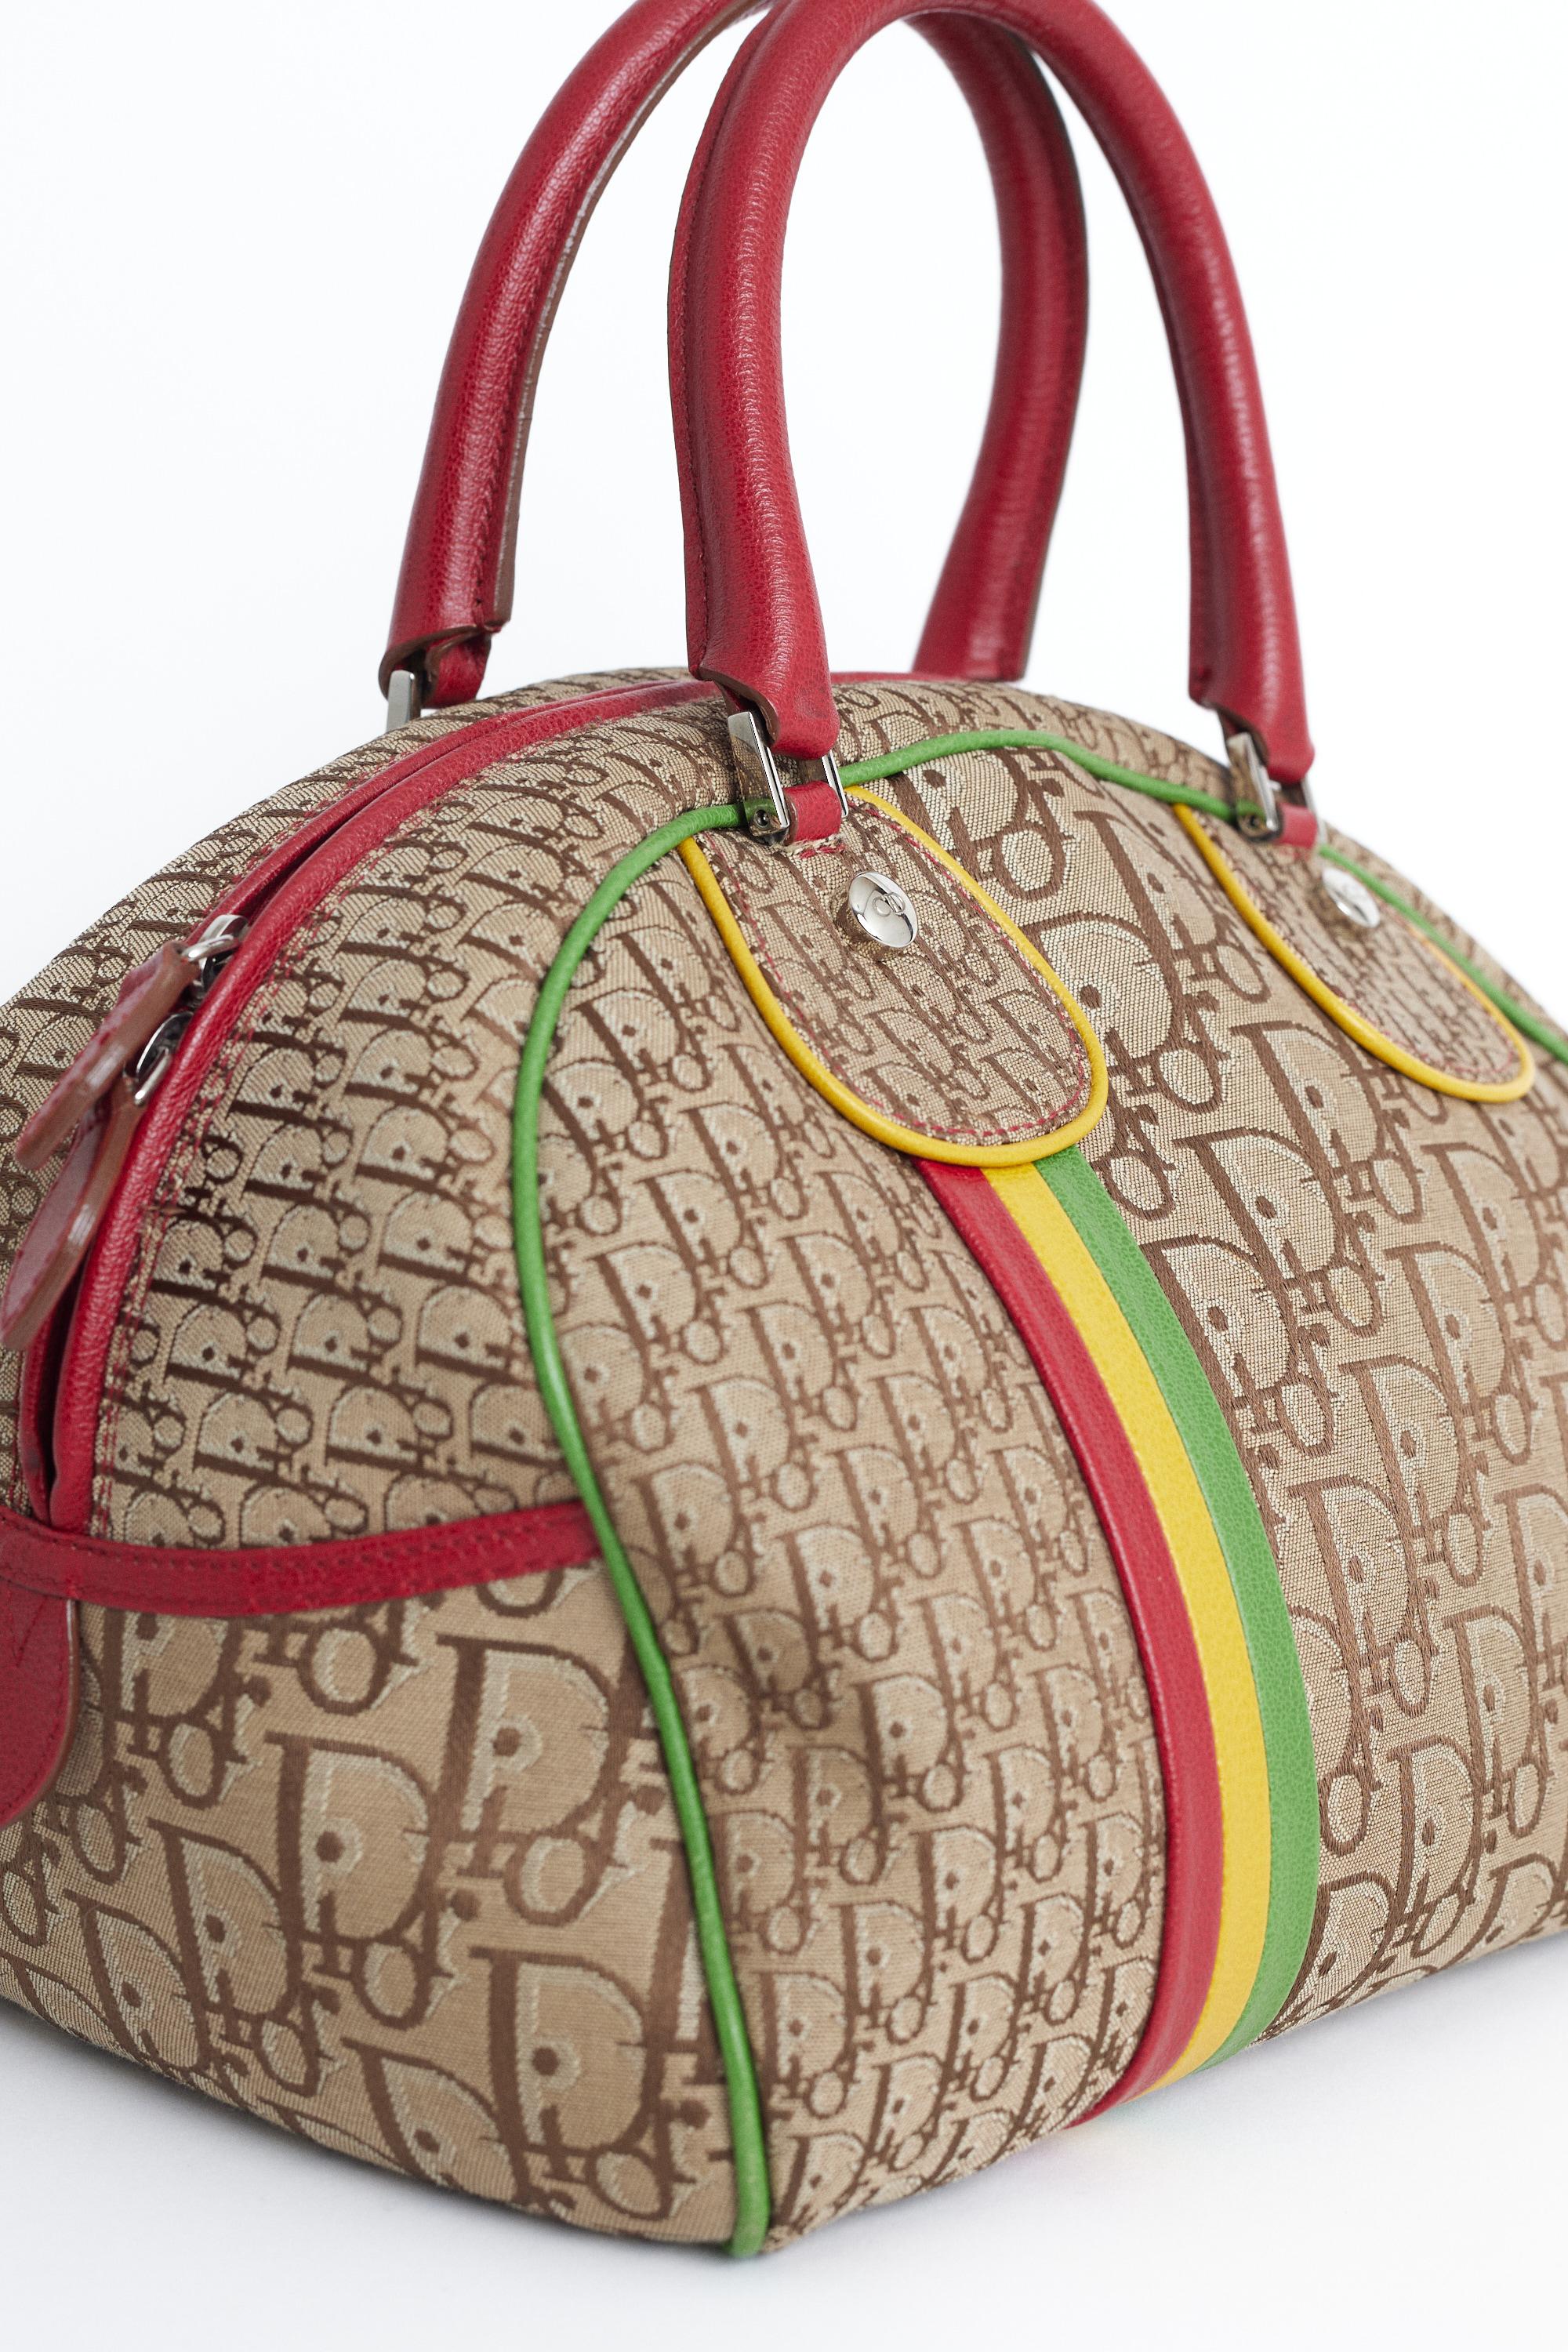 Christian Dior 2004 Rasta Print Bowling Bag In Excellent Condition For Sale In London, GB